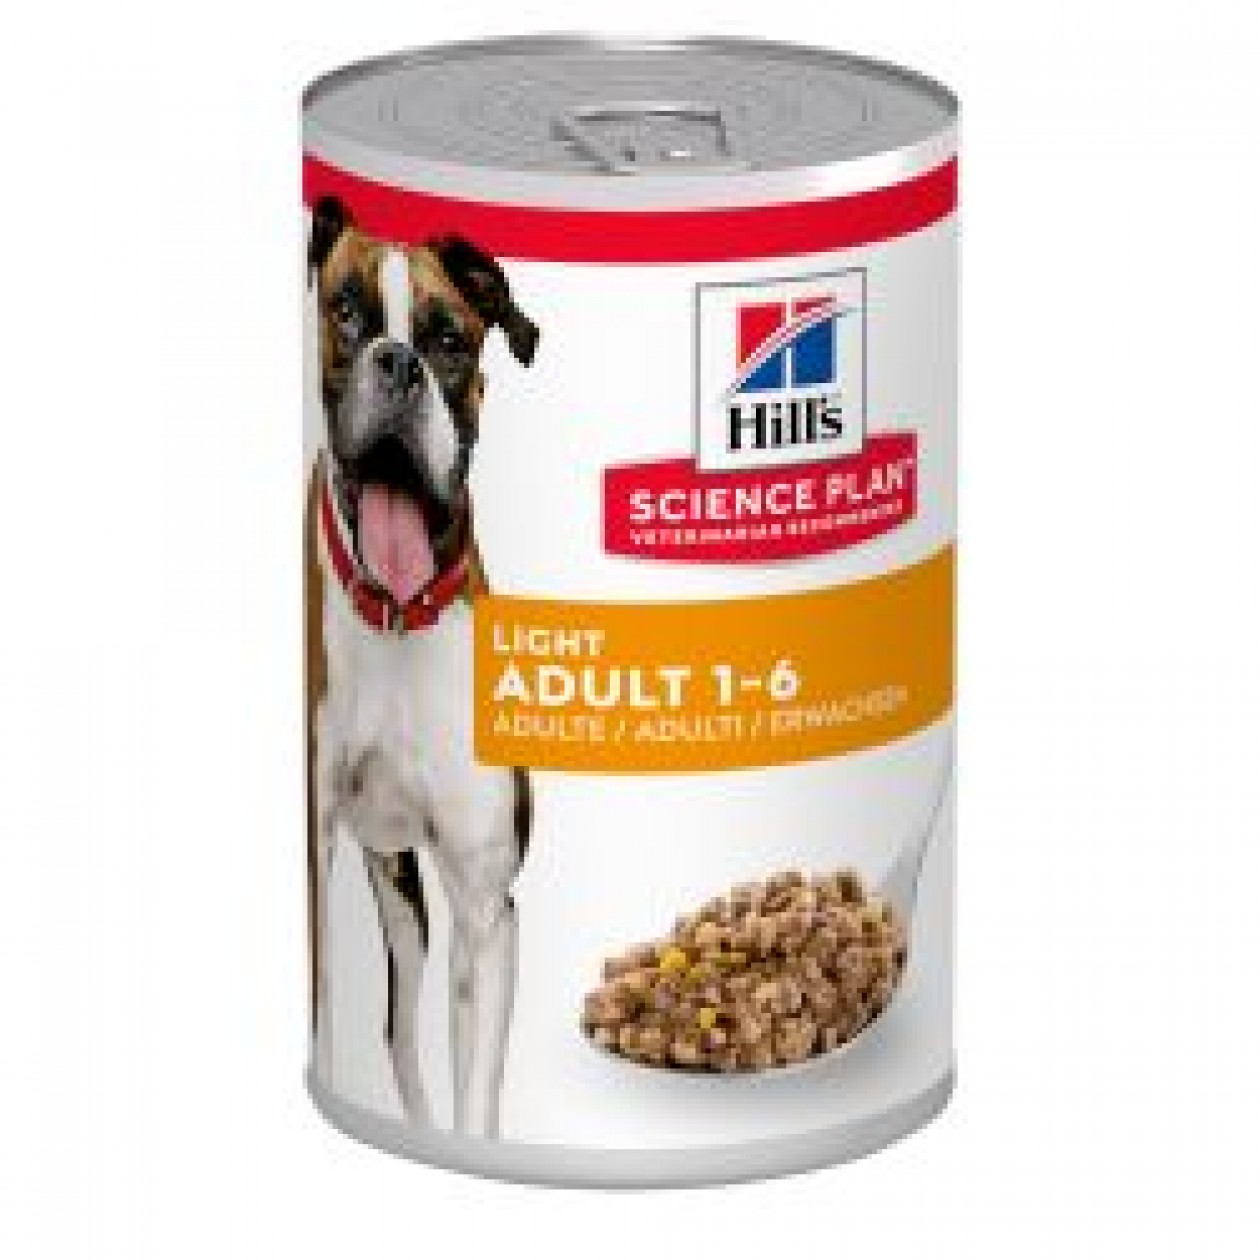 Hill's Science Plan Adult Light Wet Dog Food Chicken Flavour, 12x370g